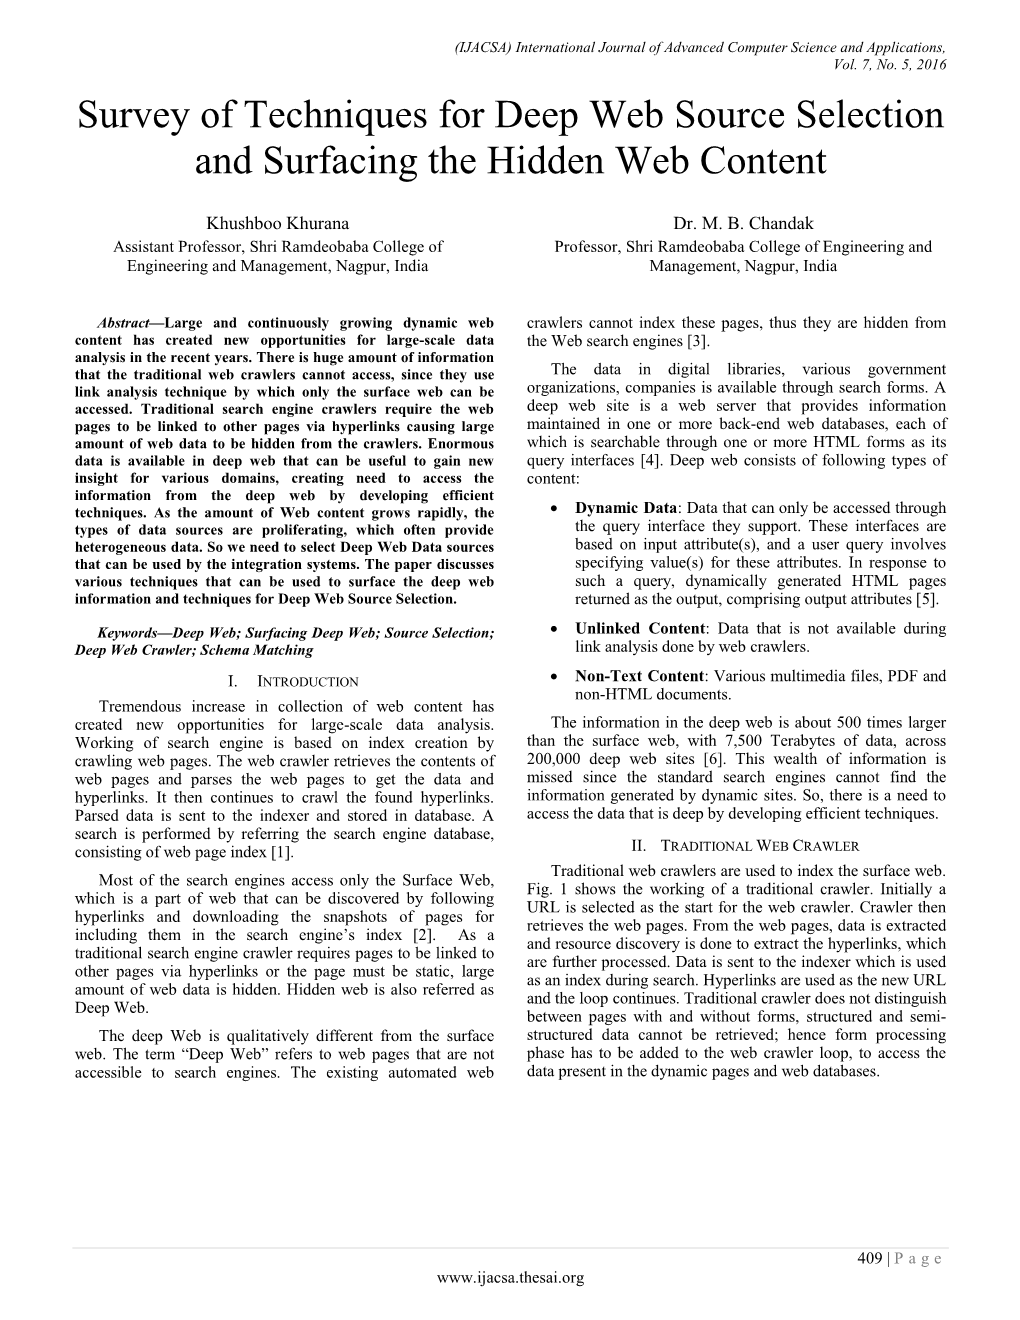 Survey of Techniques for Deep Web Source Selection and Surfacing the Hidden Web Content